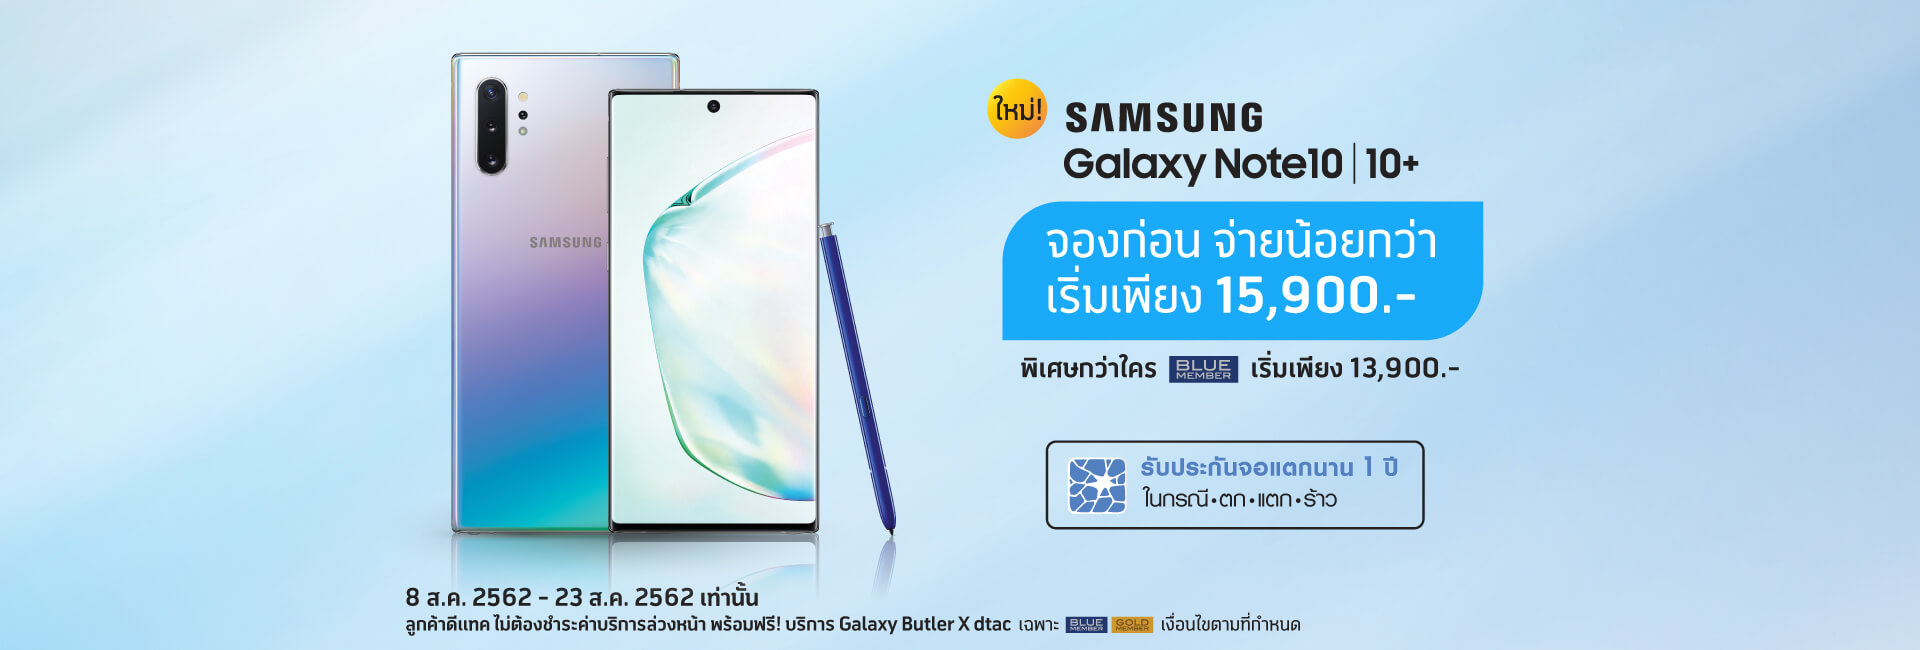 Galaxy Note10 dtac